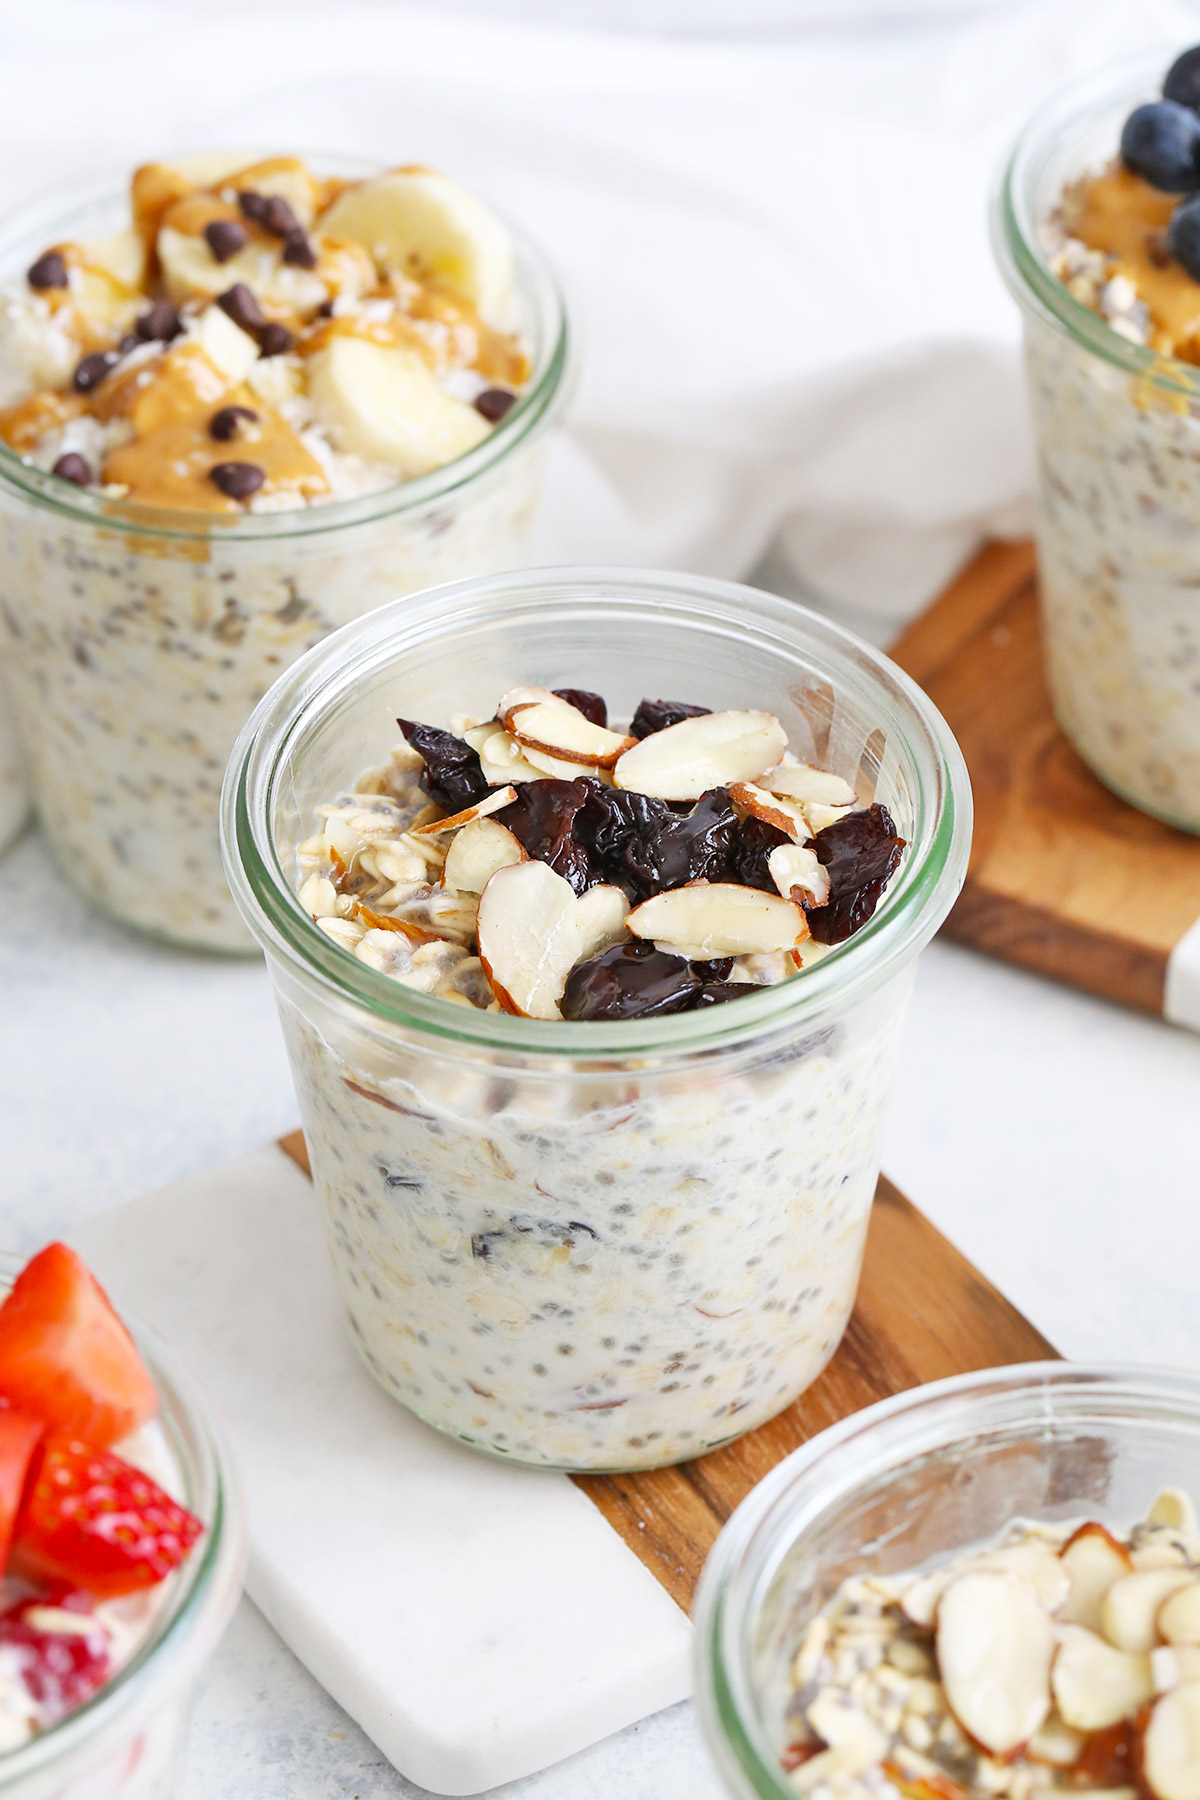 Cherry Almond Overnight Oats from One Lovely Life